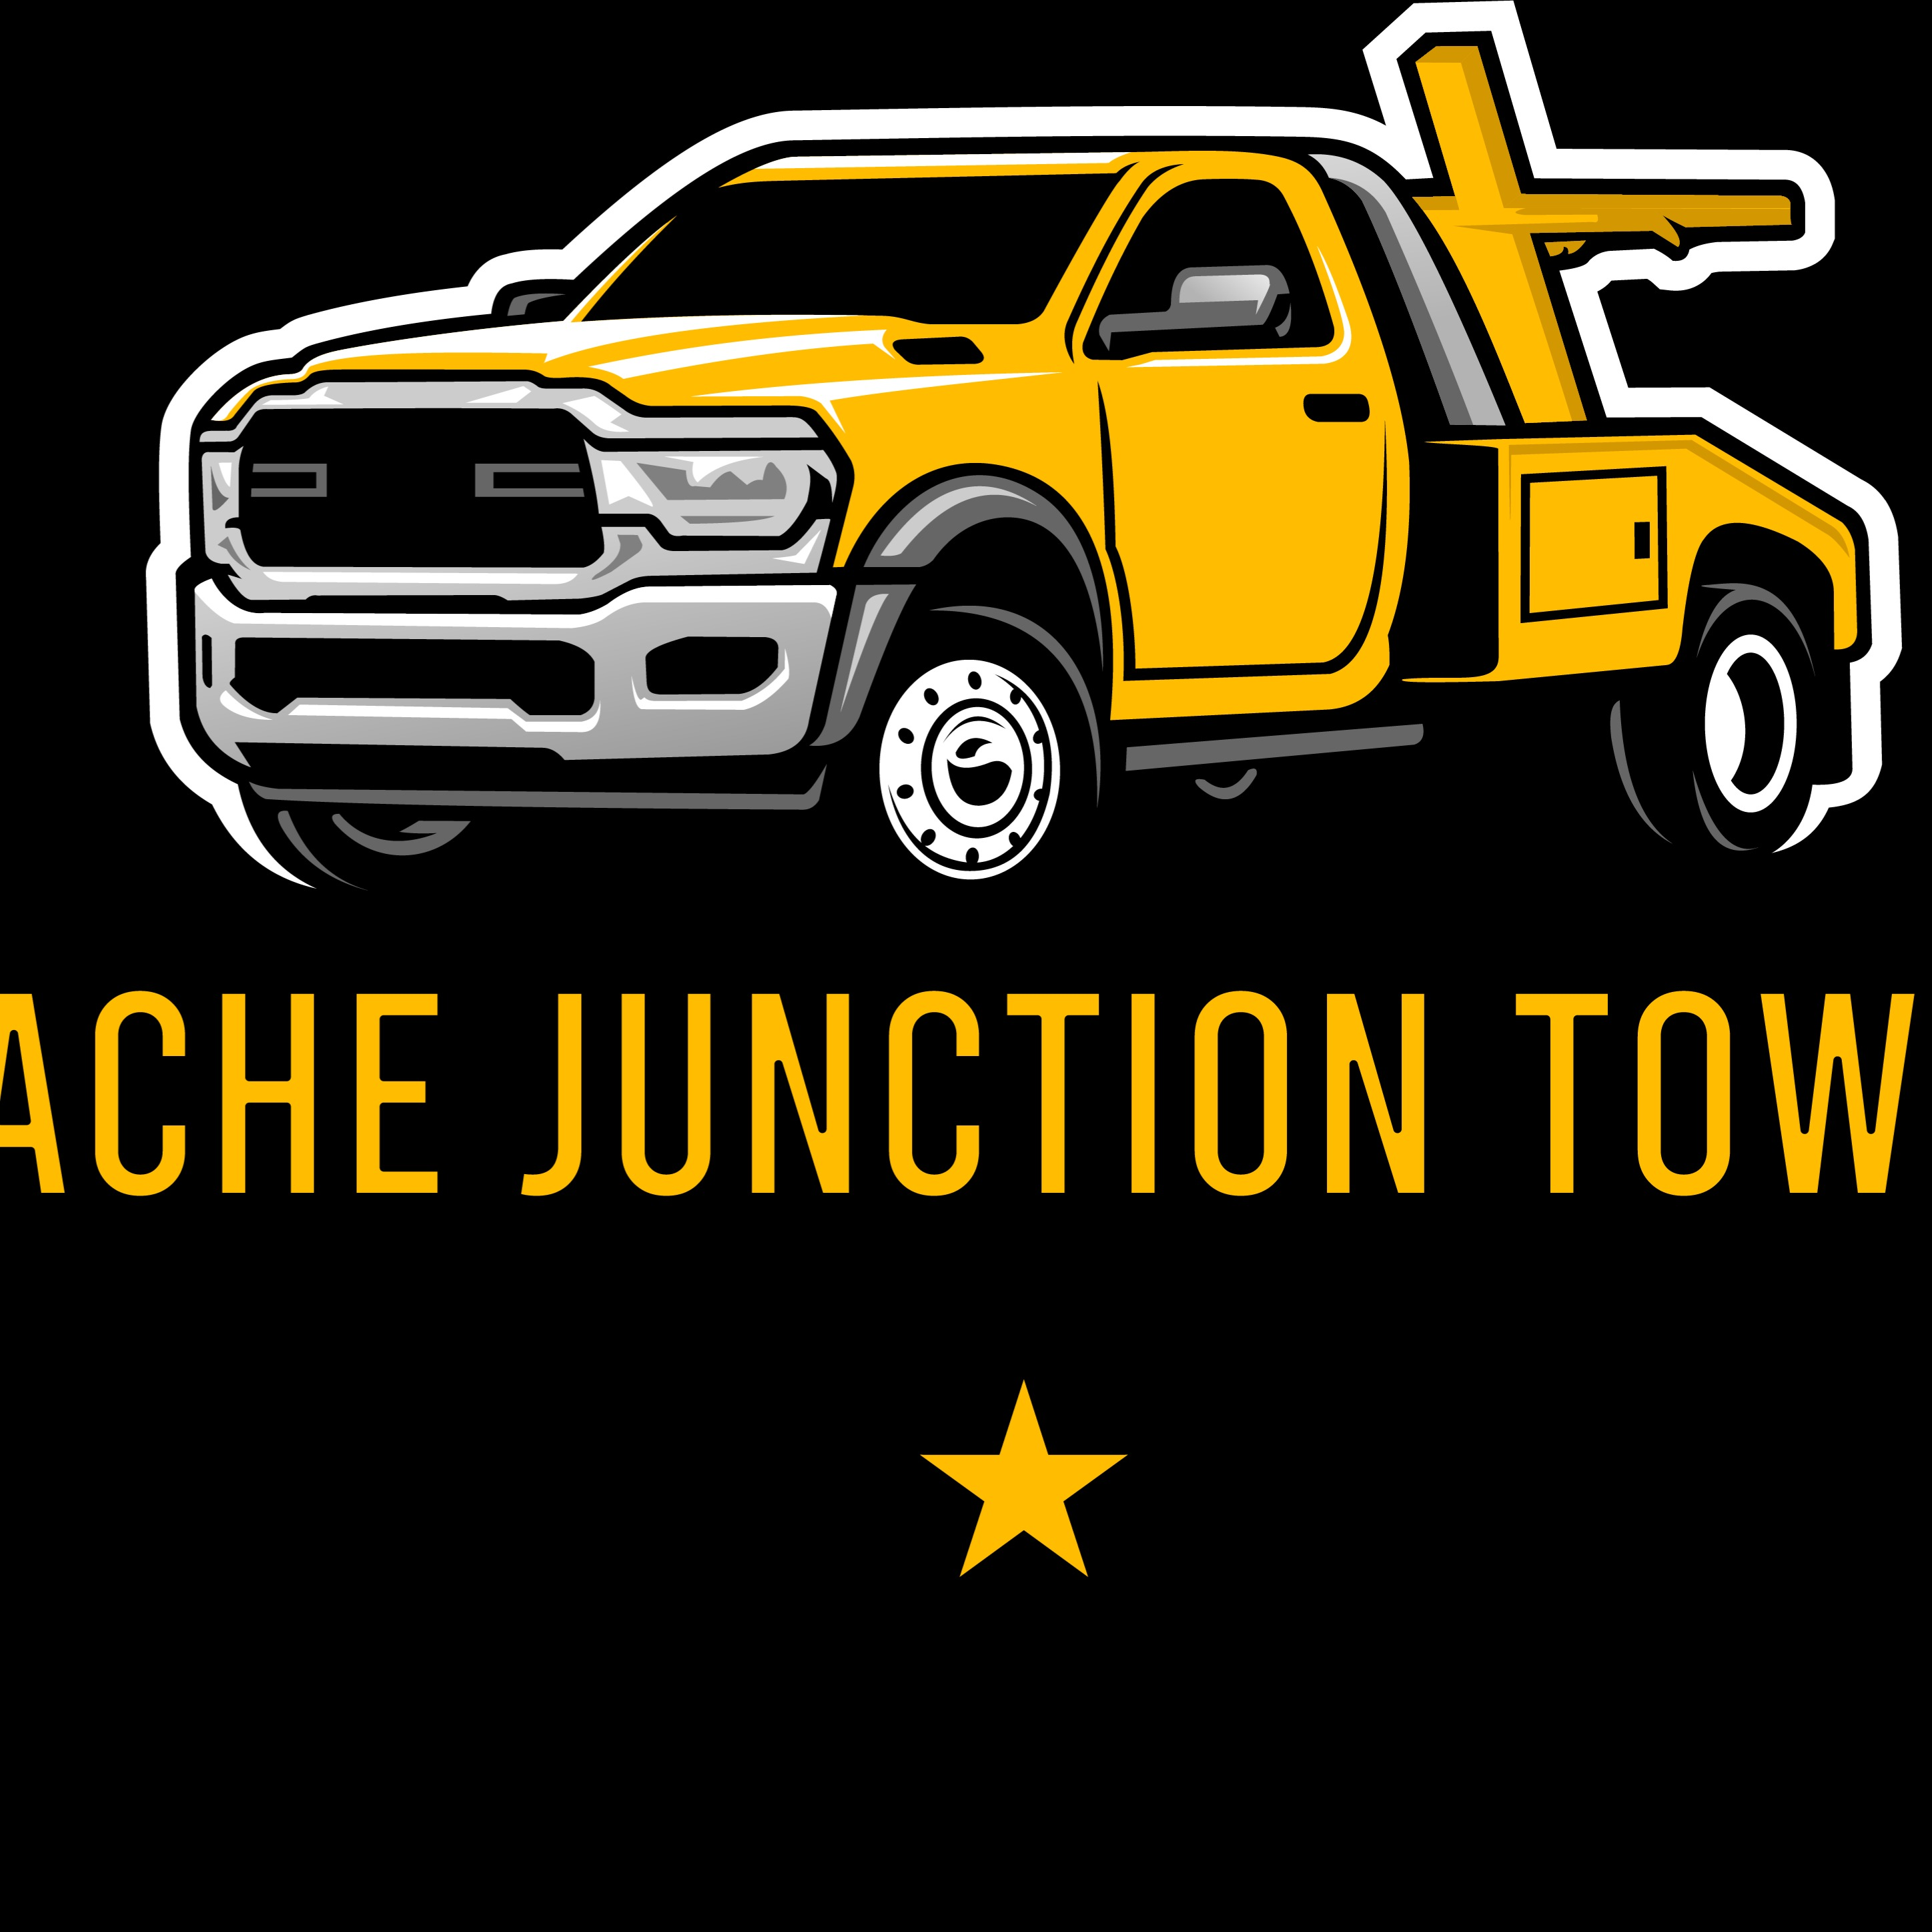 Apache Junction Towing